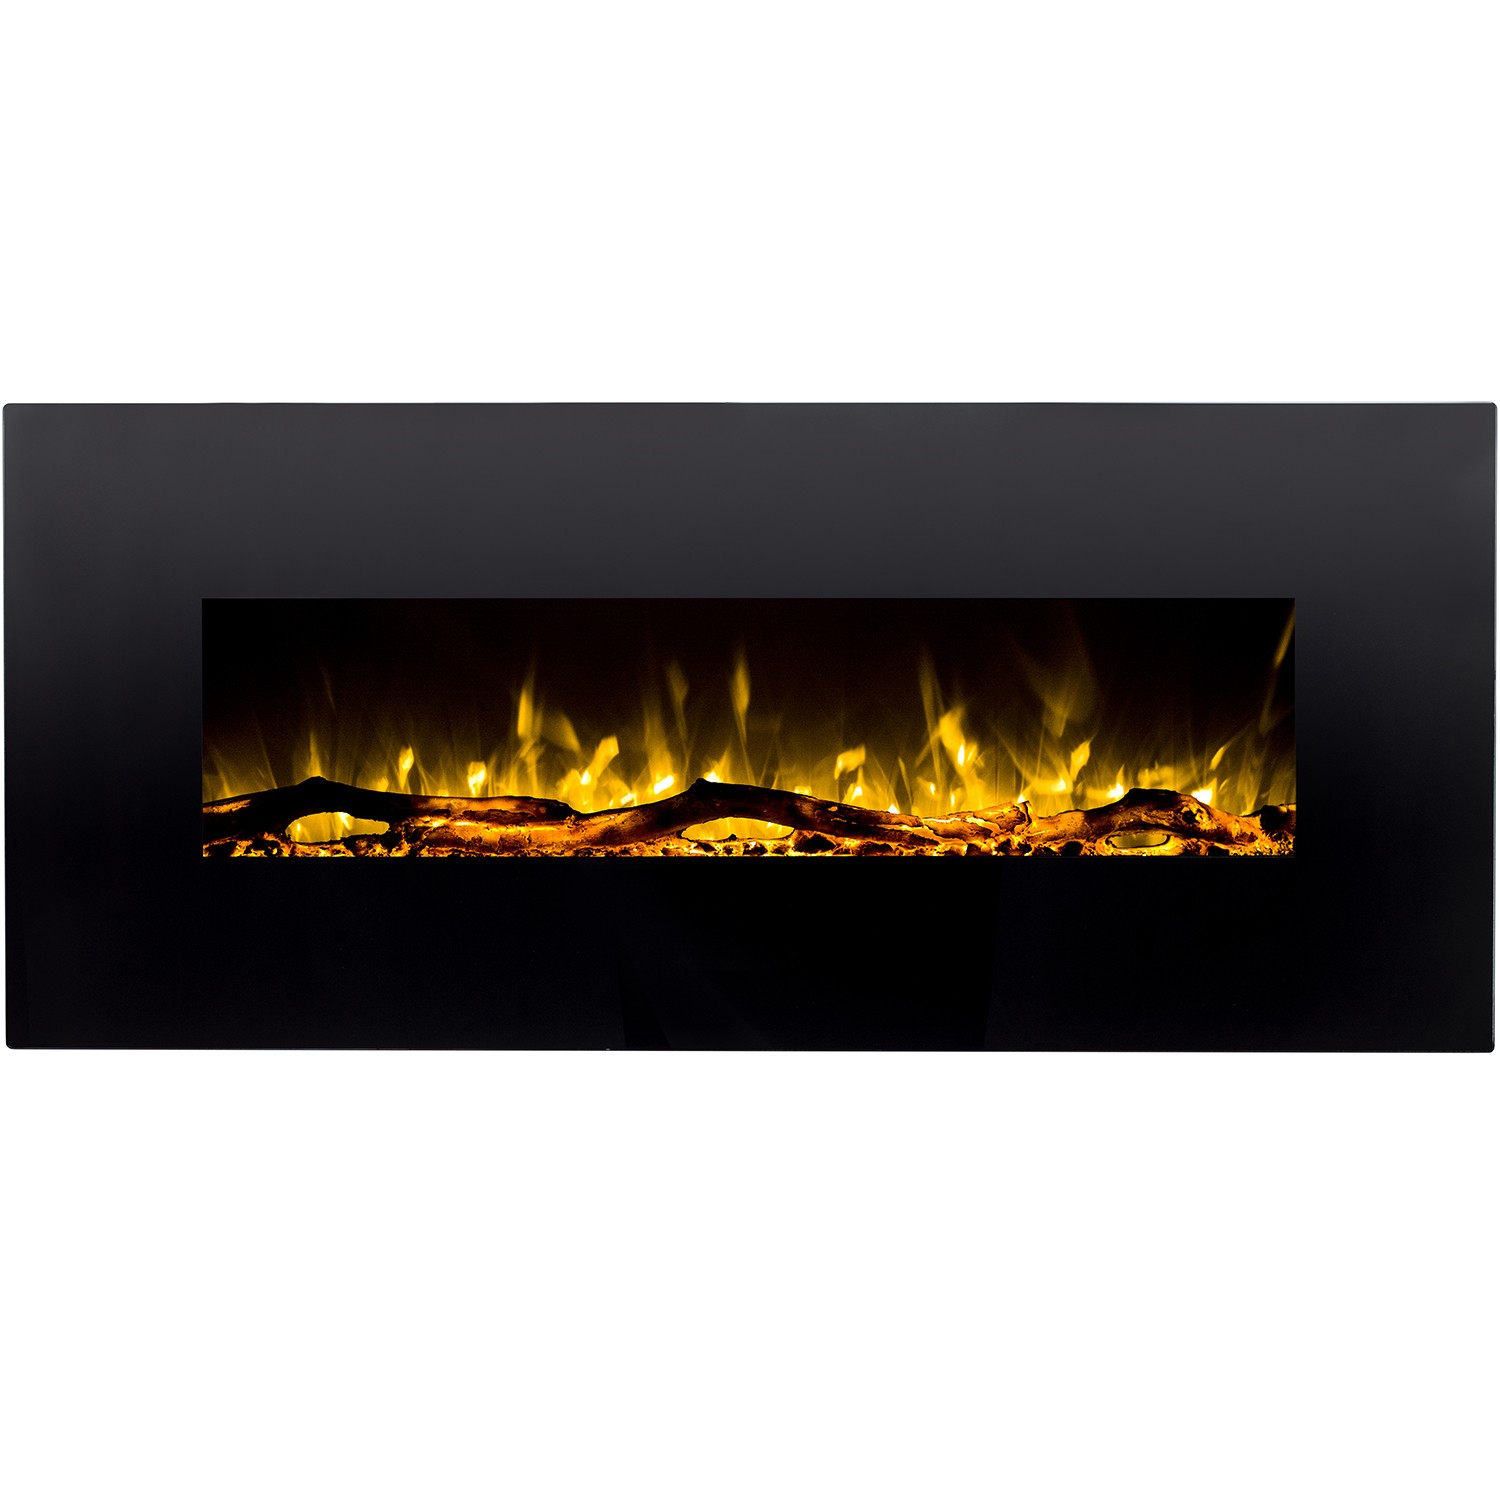 Regal Flame Madison 35" Log Ventless Heater Electric Wall Mounted Fireplace Better than Wood Fireplaces, Gas Logs, Fireplace Ins